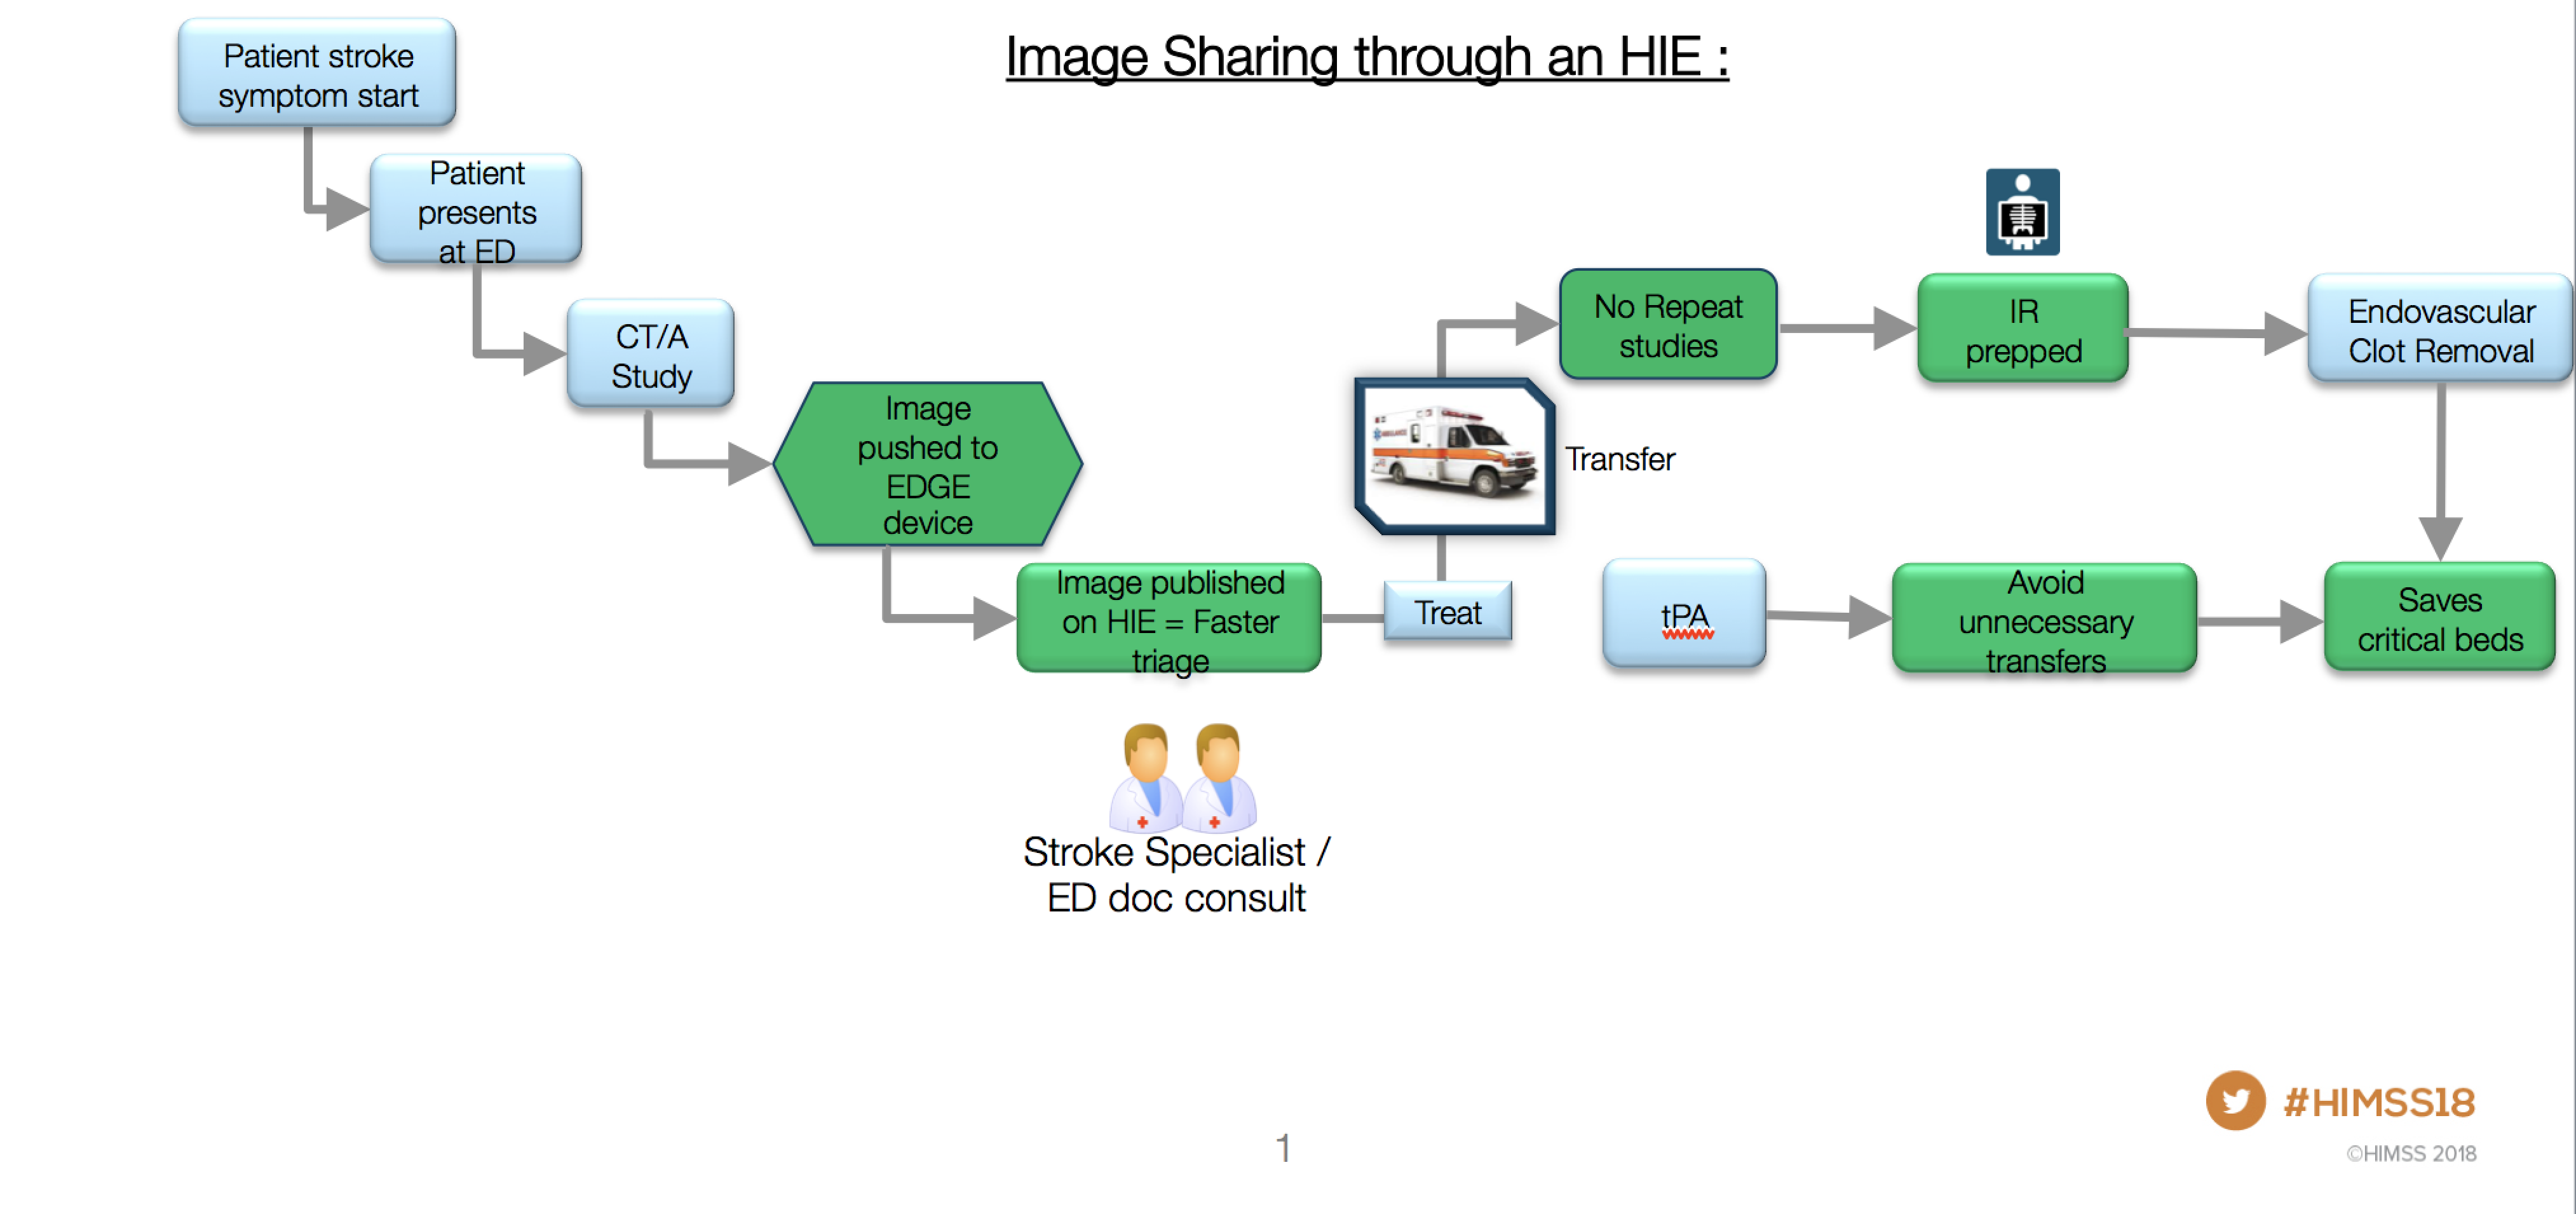 How image sharing through a health information exchange benefits patients while saving time and money is depicted in this slide shown at HIMSS 2018. Graphic courtesy of Karan Mansukhani.